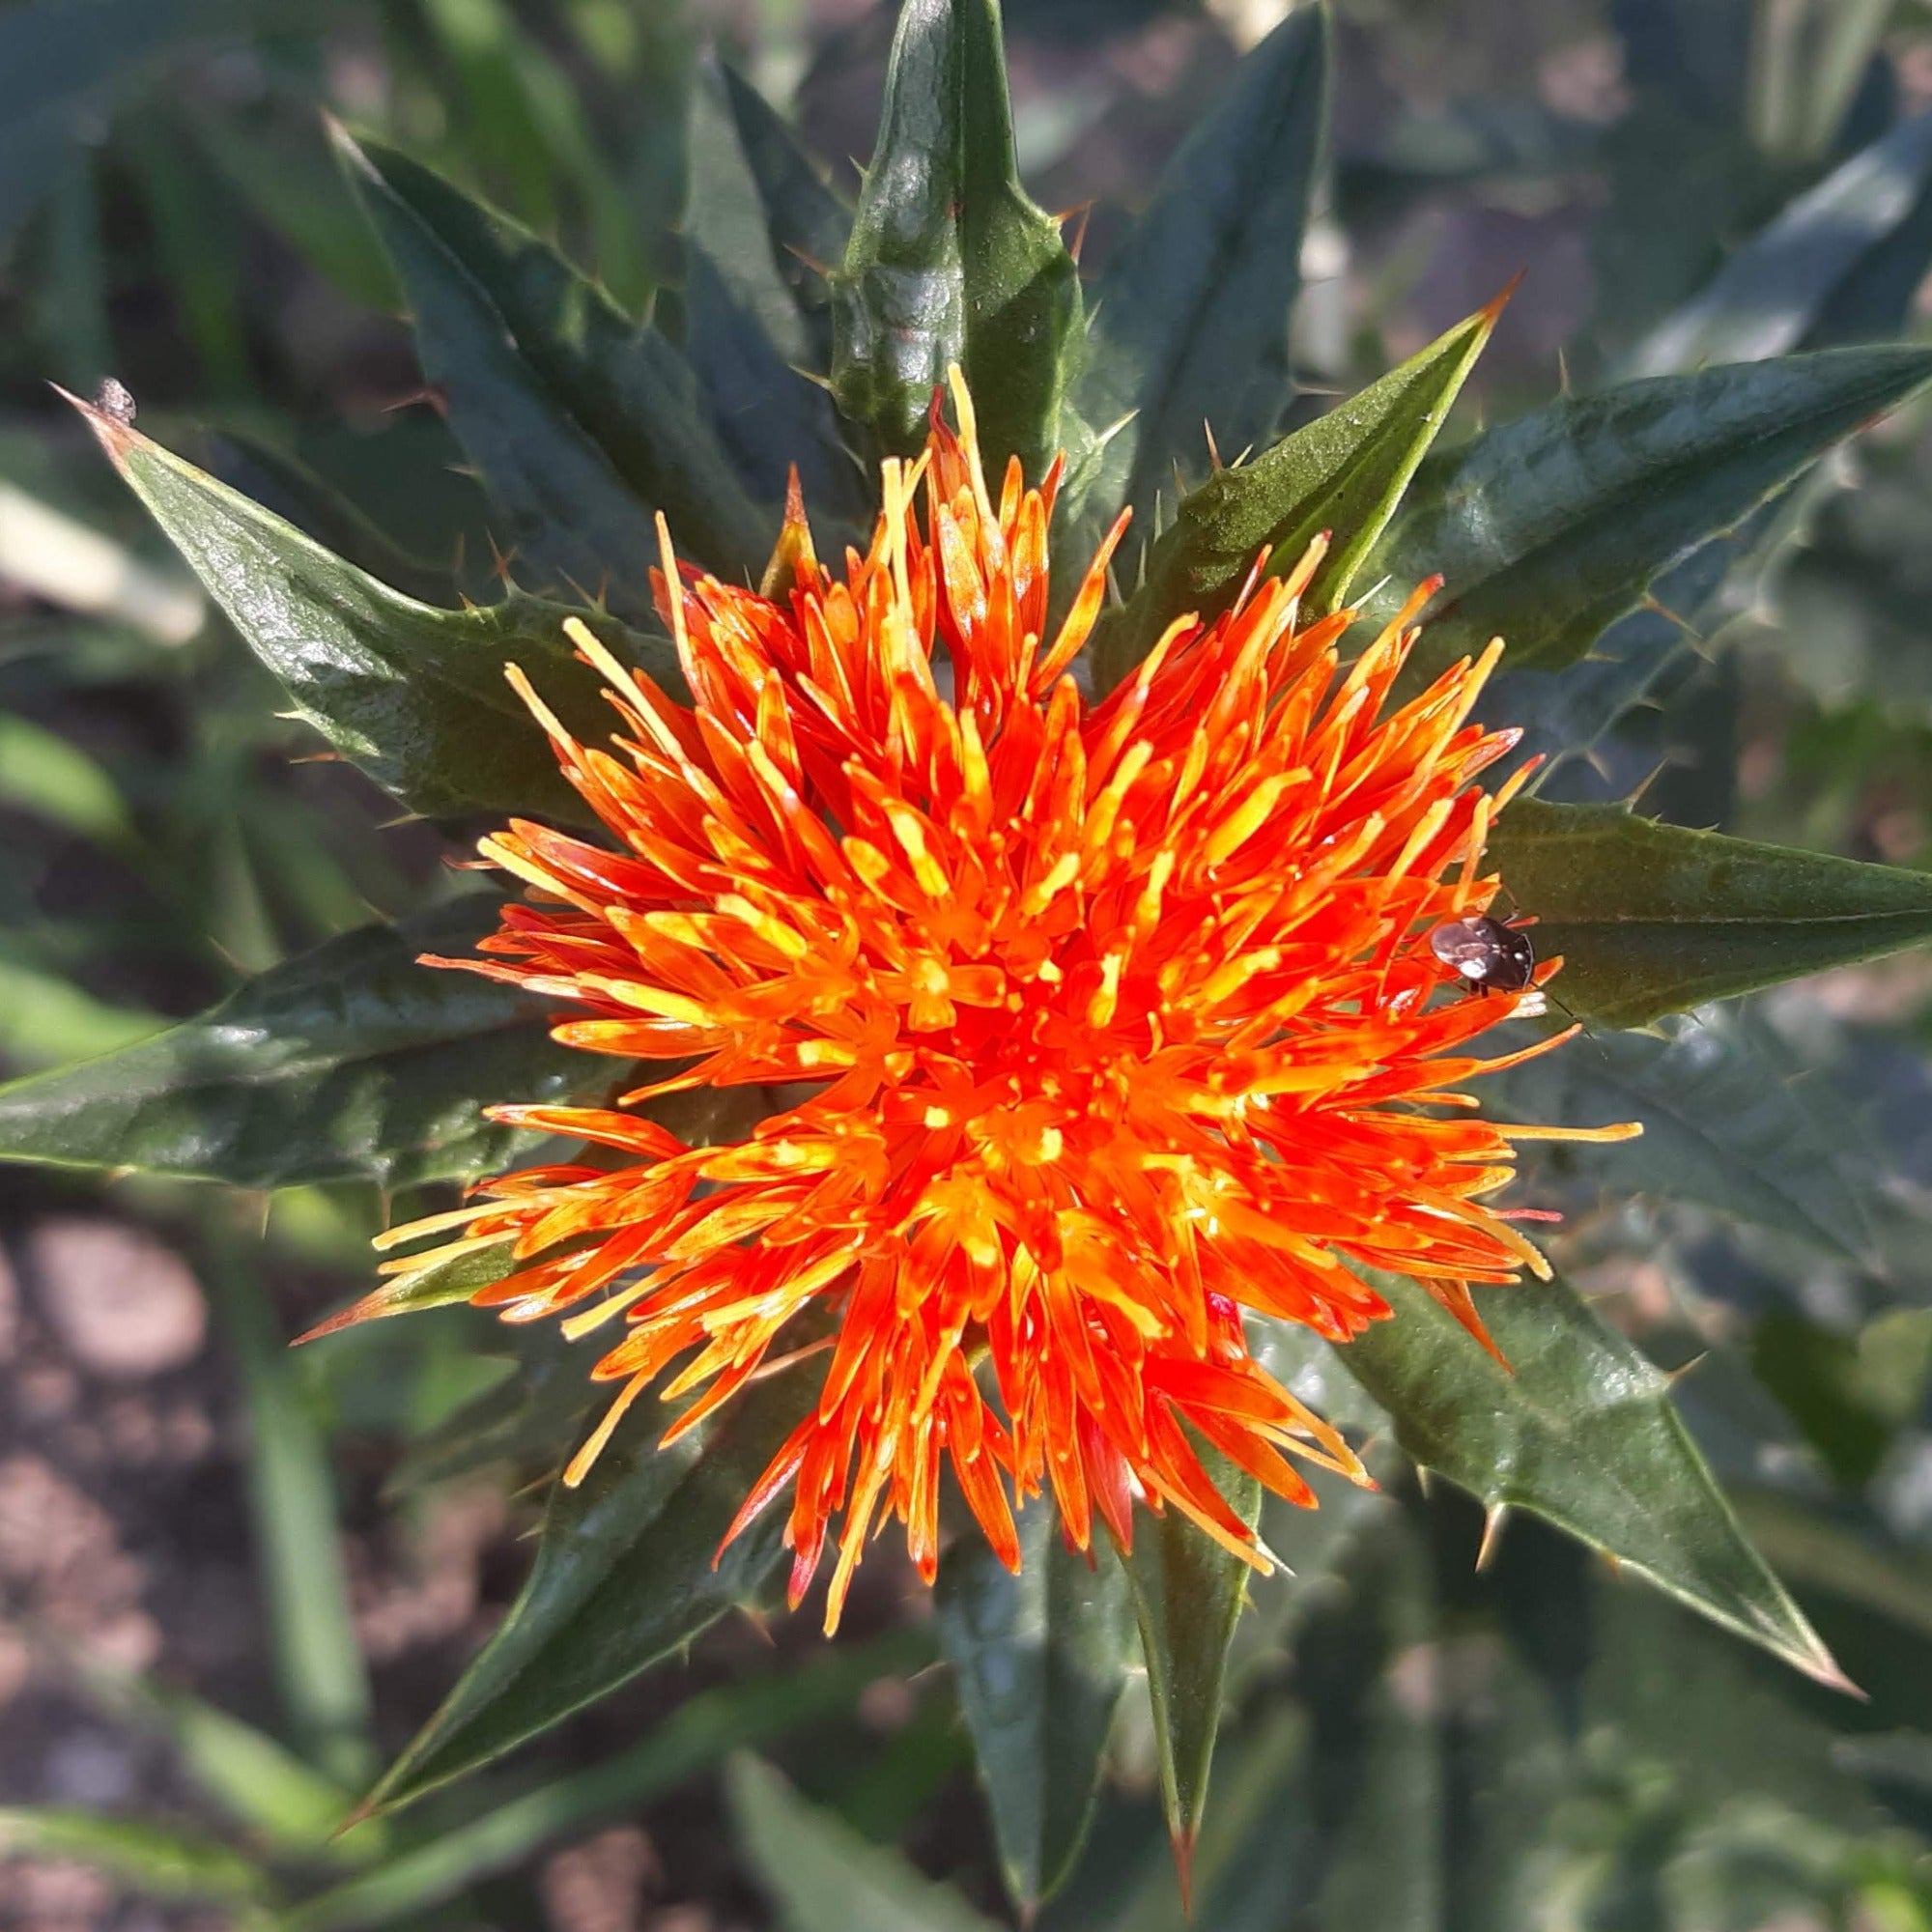 A bright orange, yellow and red bloom of a Lorenzo Trussoni heirloom safflower plant with spines on leaves visible